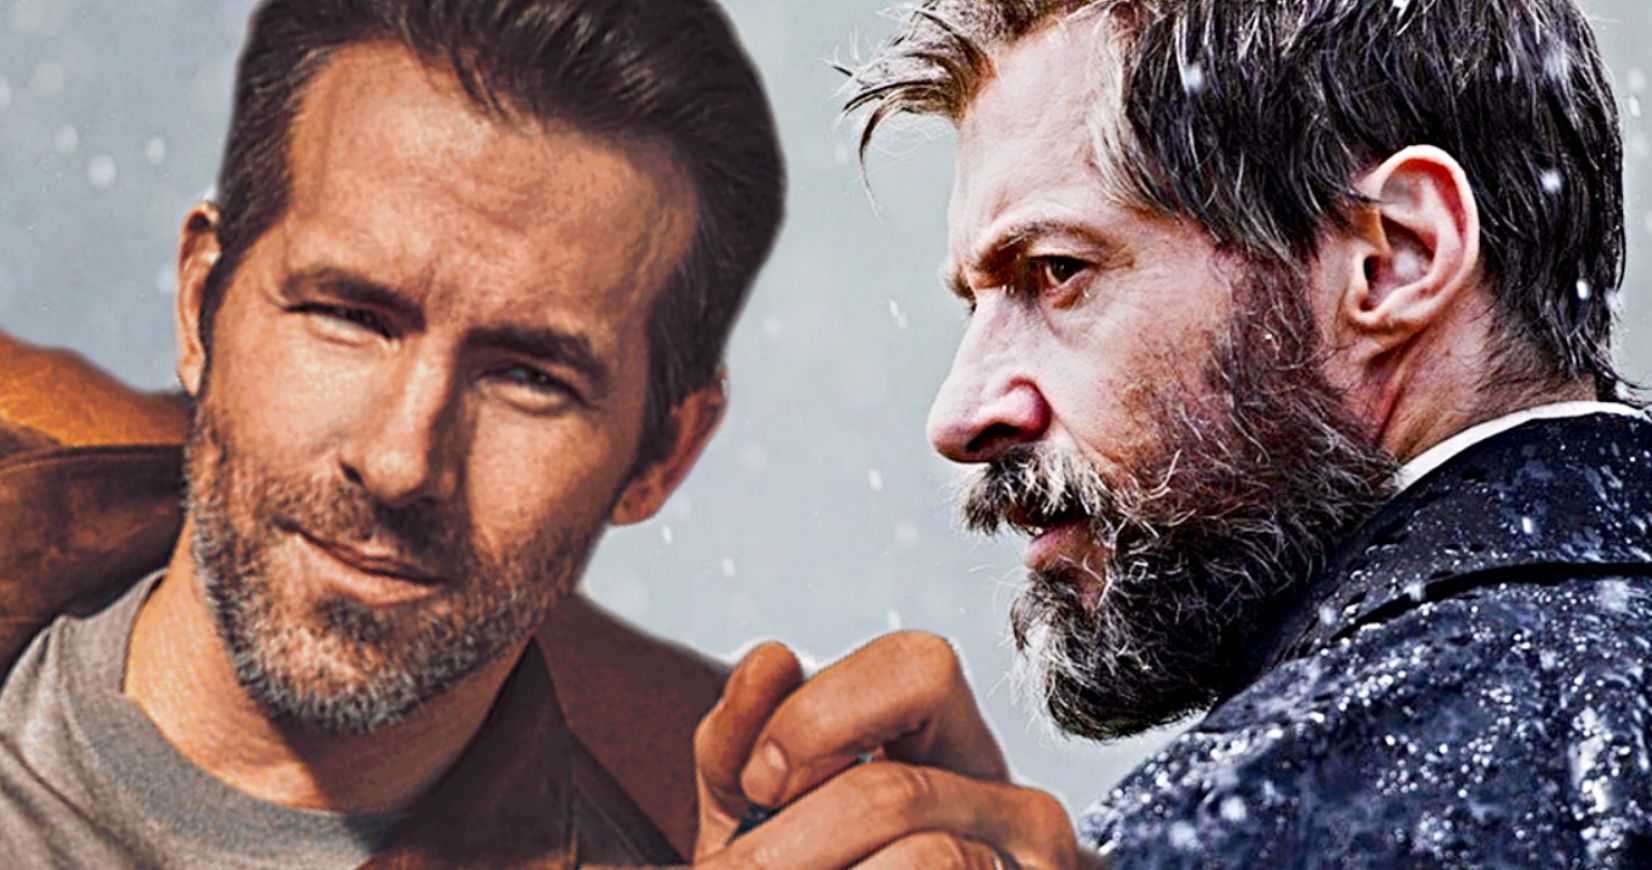 Hugh Jackman Is Down for a Face/Off Remake with Ryan Reynolds